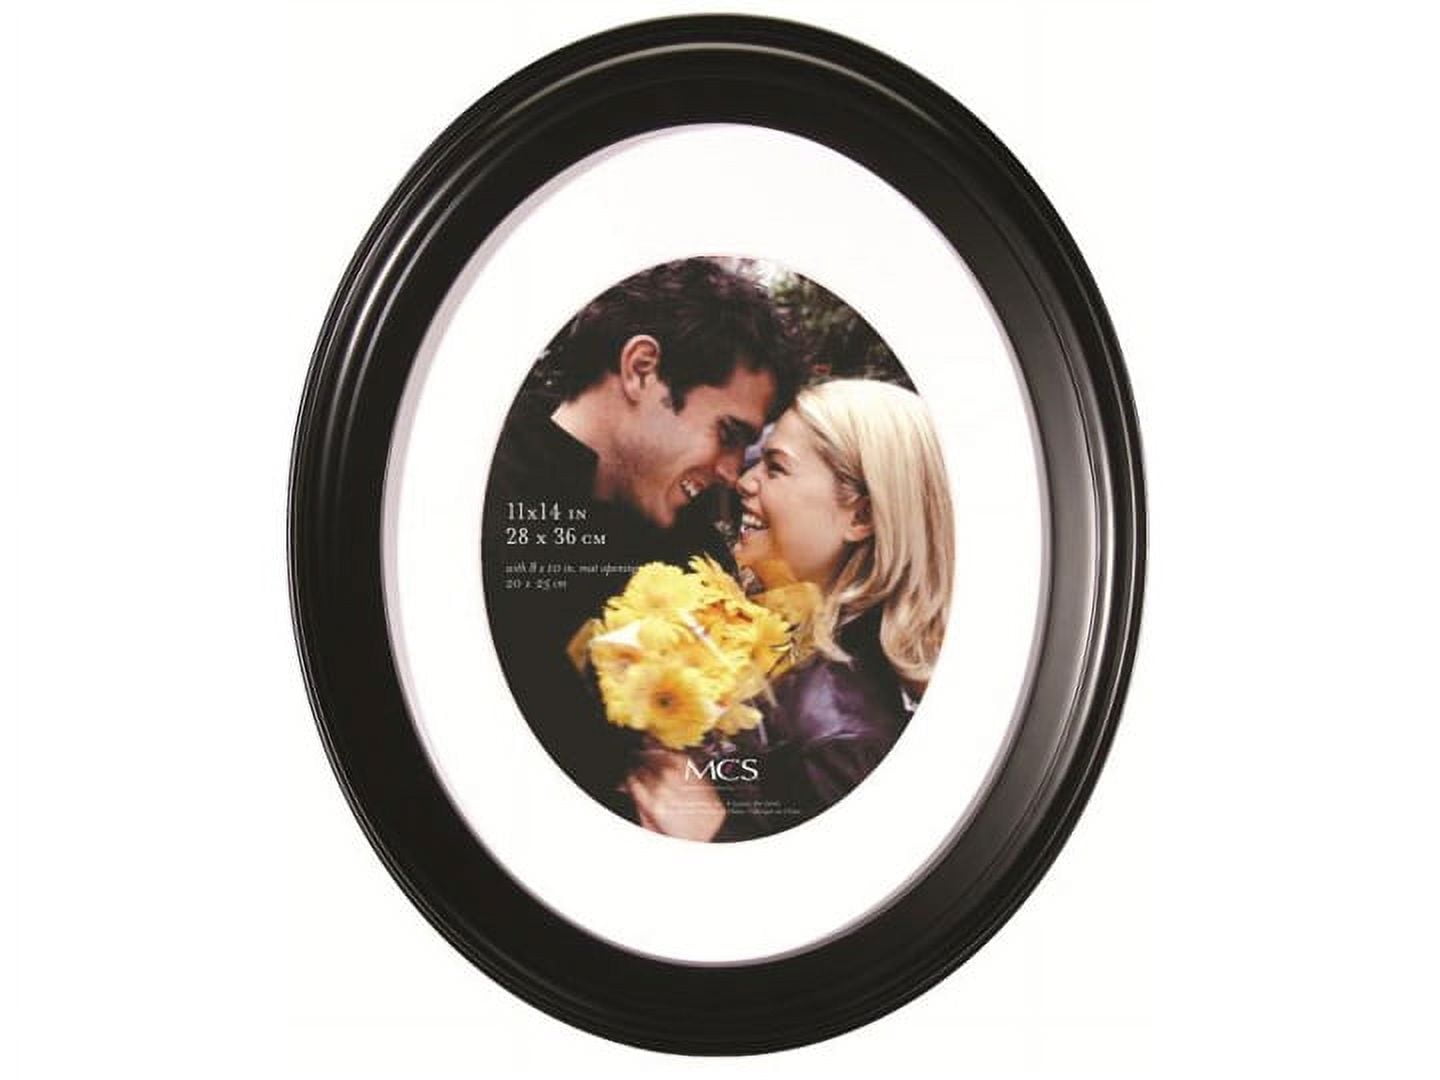 MCS Oval Portrait Frame 11x14 with 8x10 Mat Opening